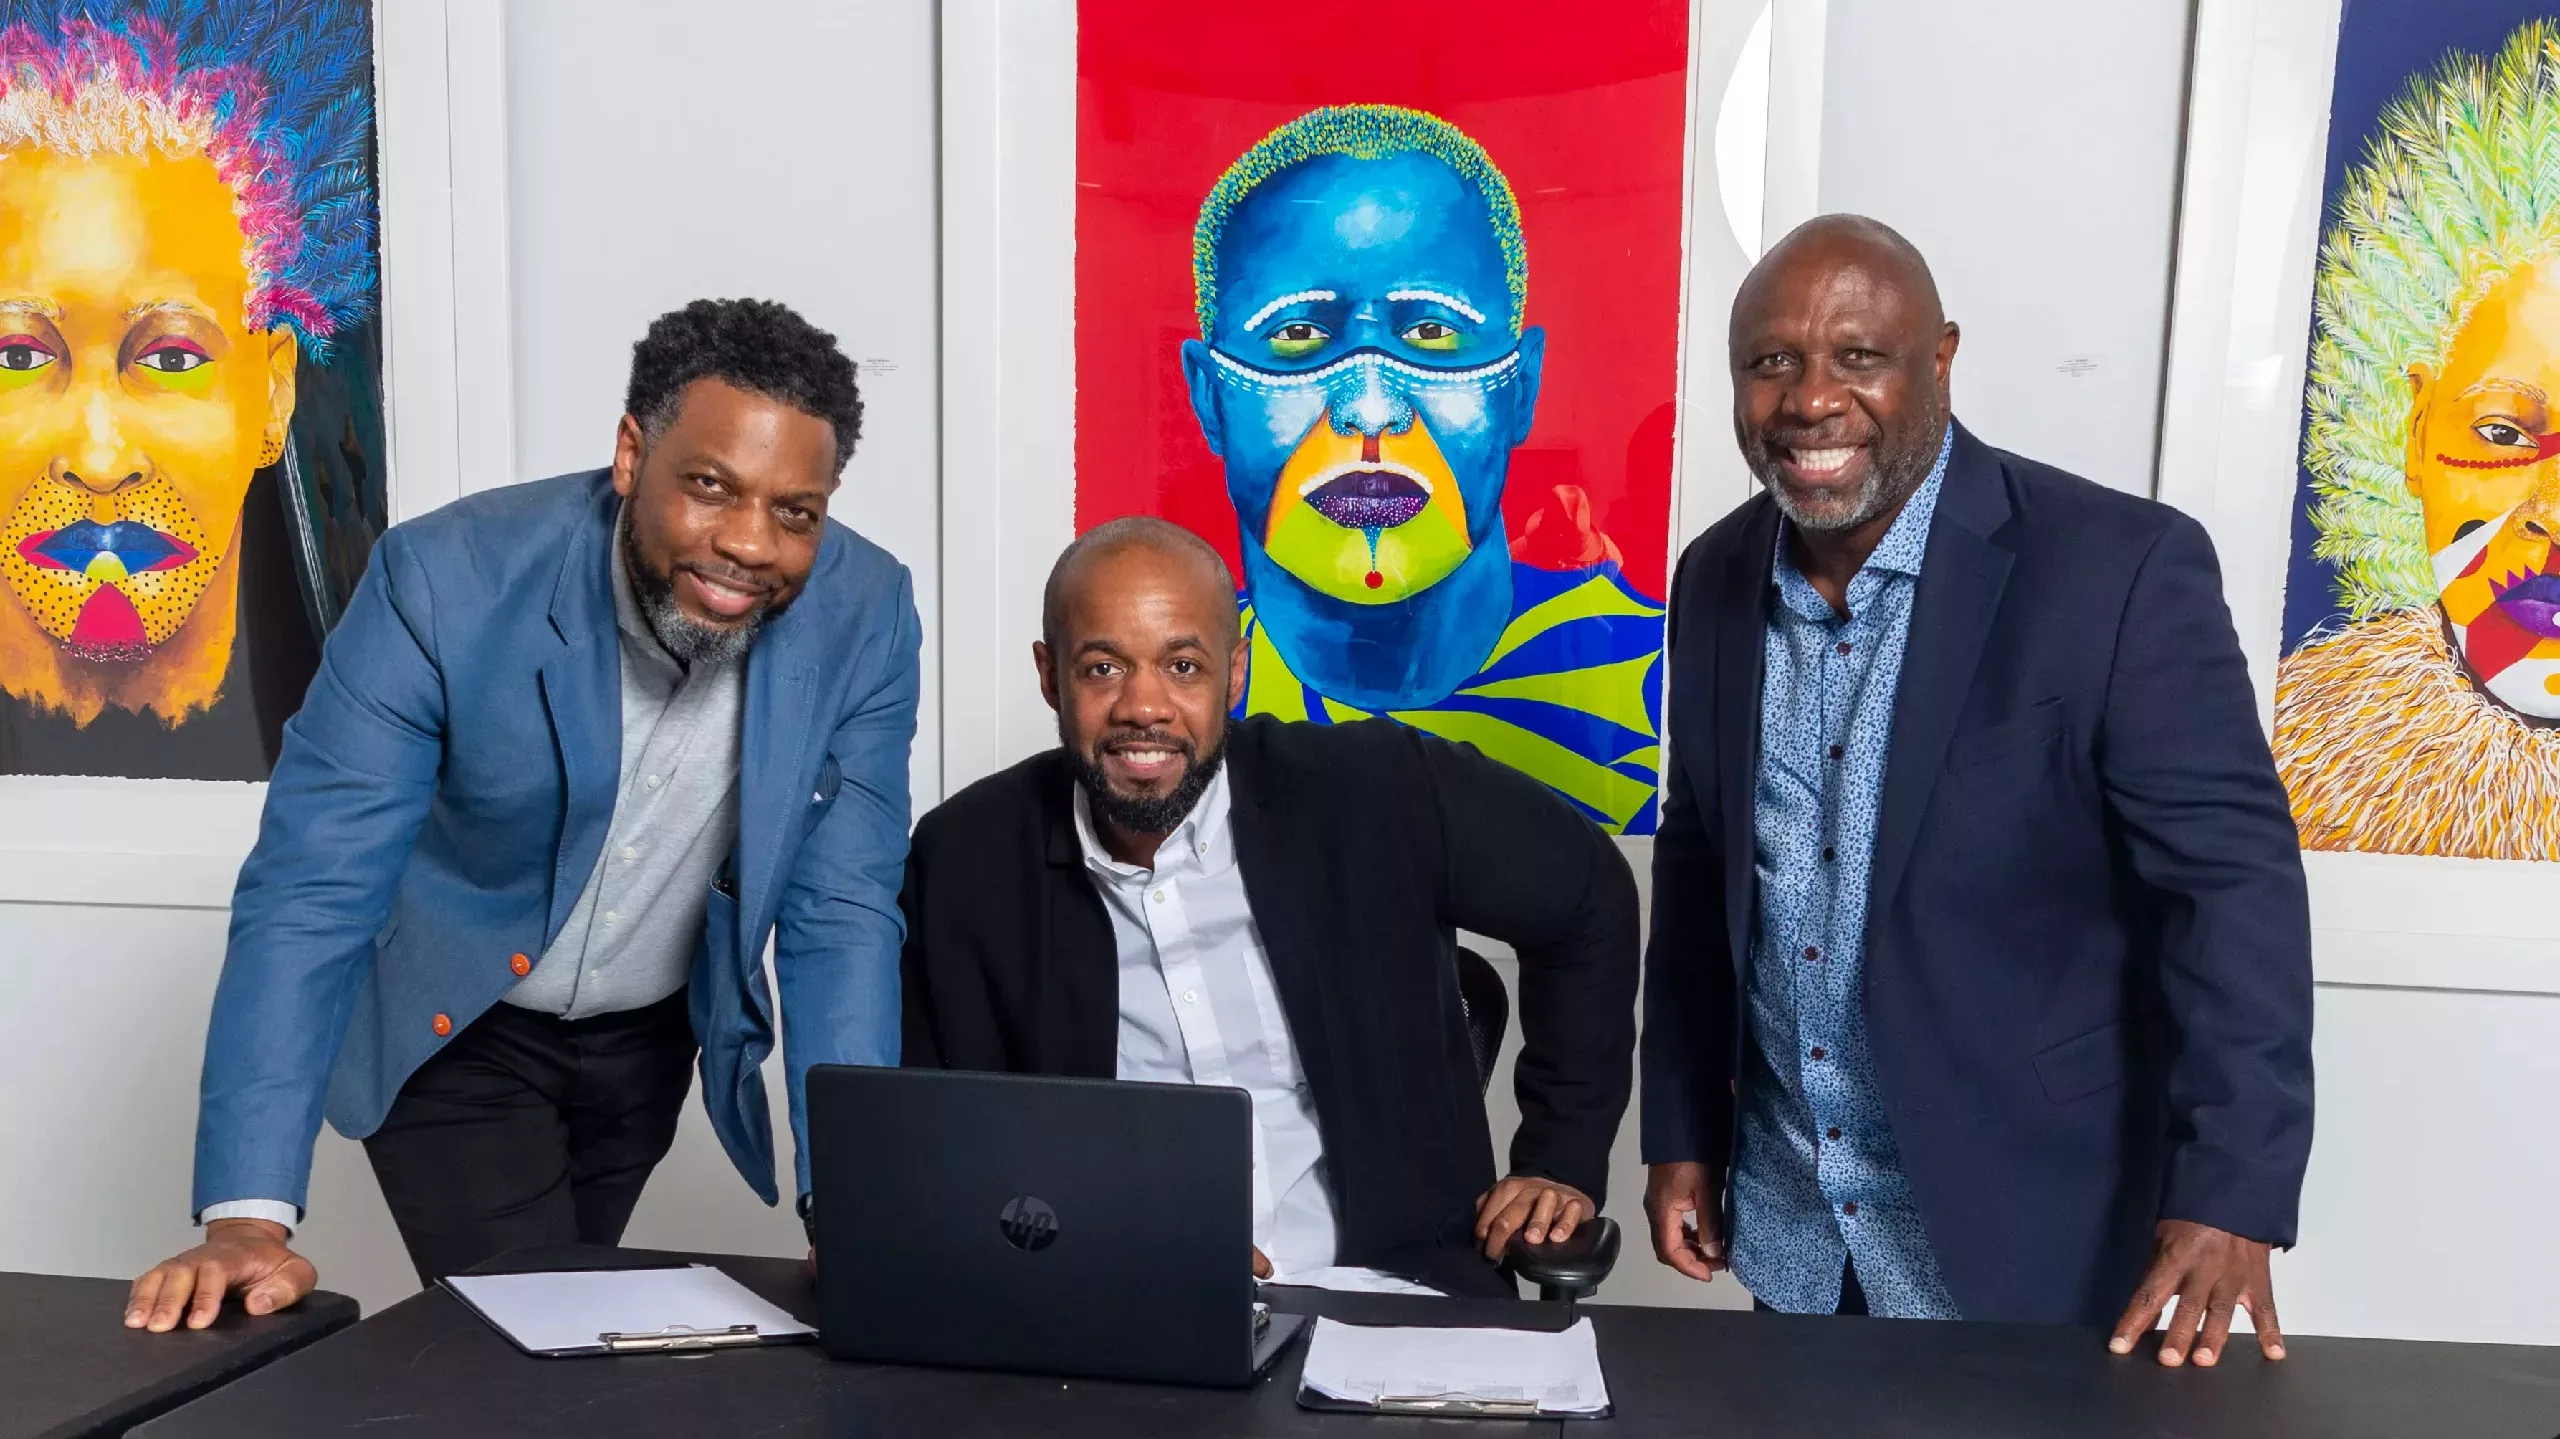 Three men gathered around a laptop smiling at the camera with art hanging in the background